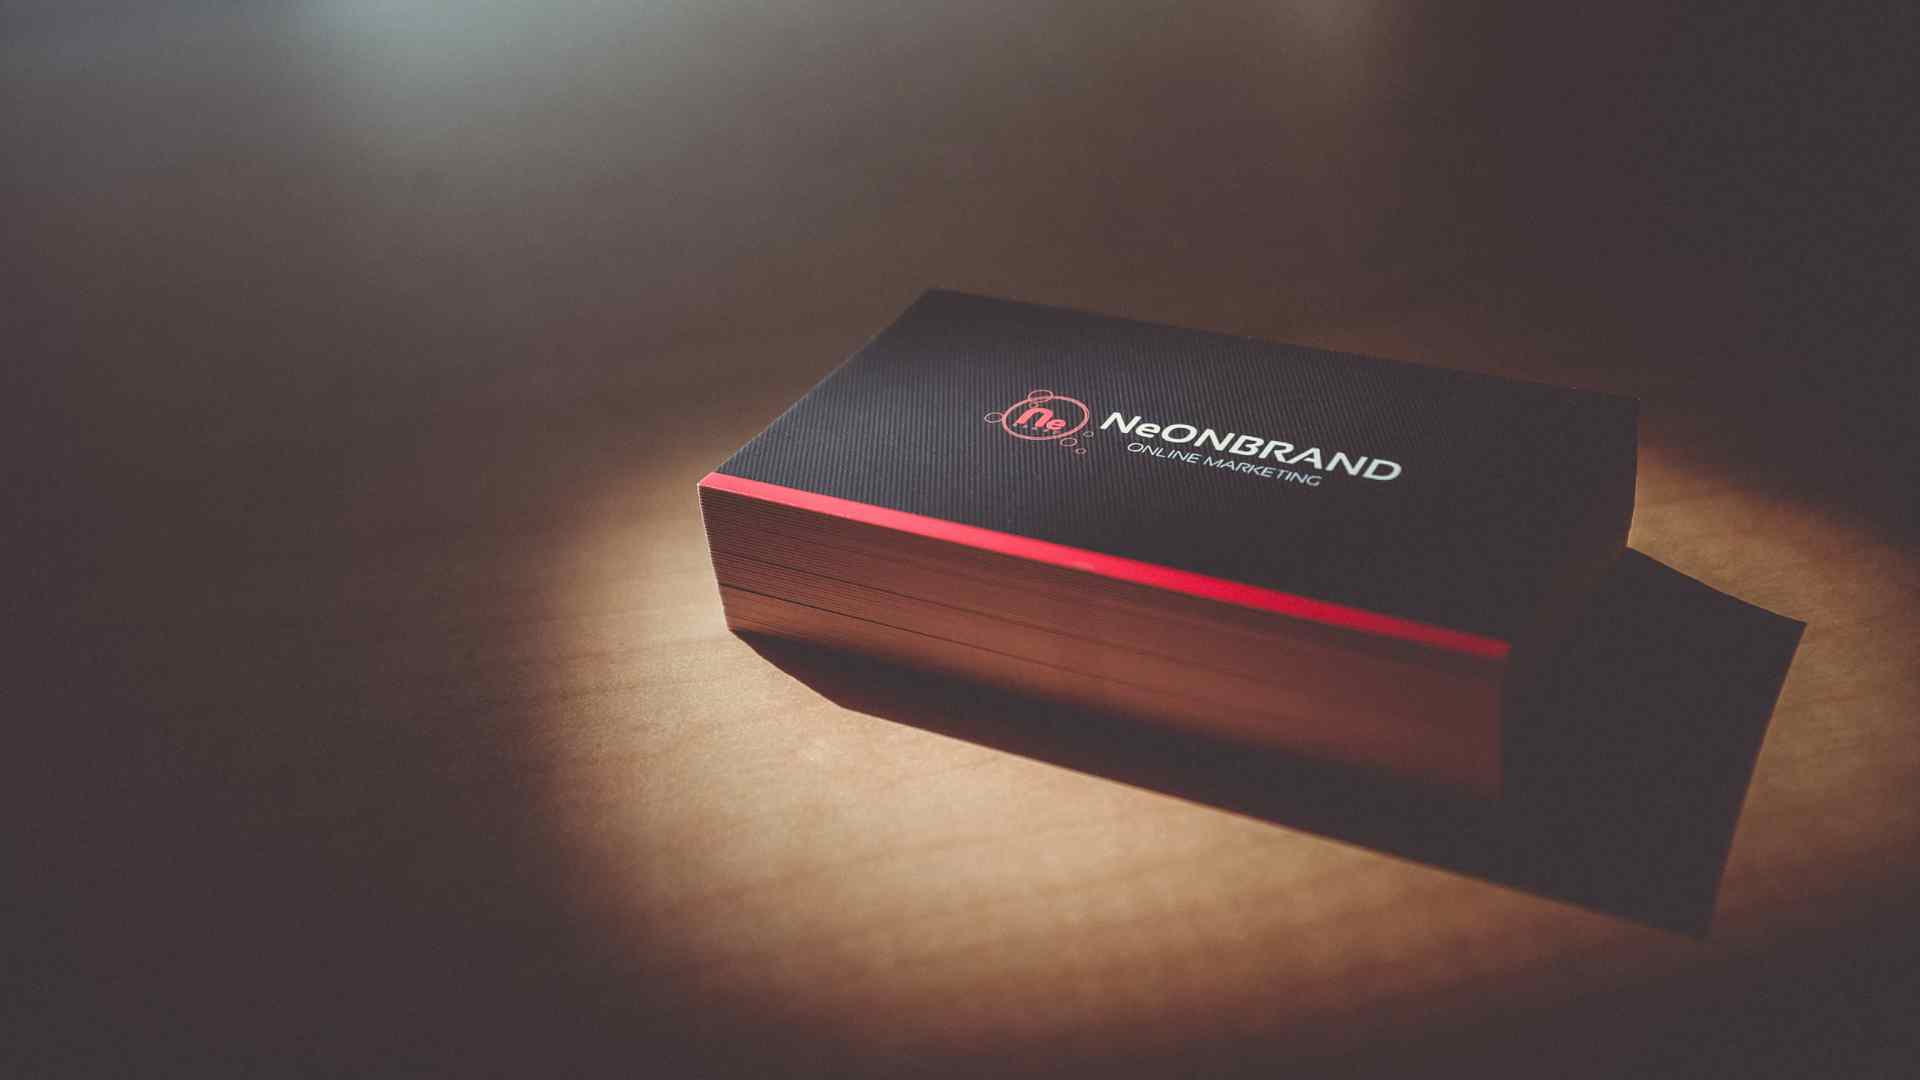 Well designed Business Cards are a cost-effective marketing tool